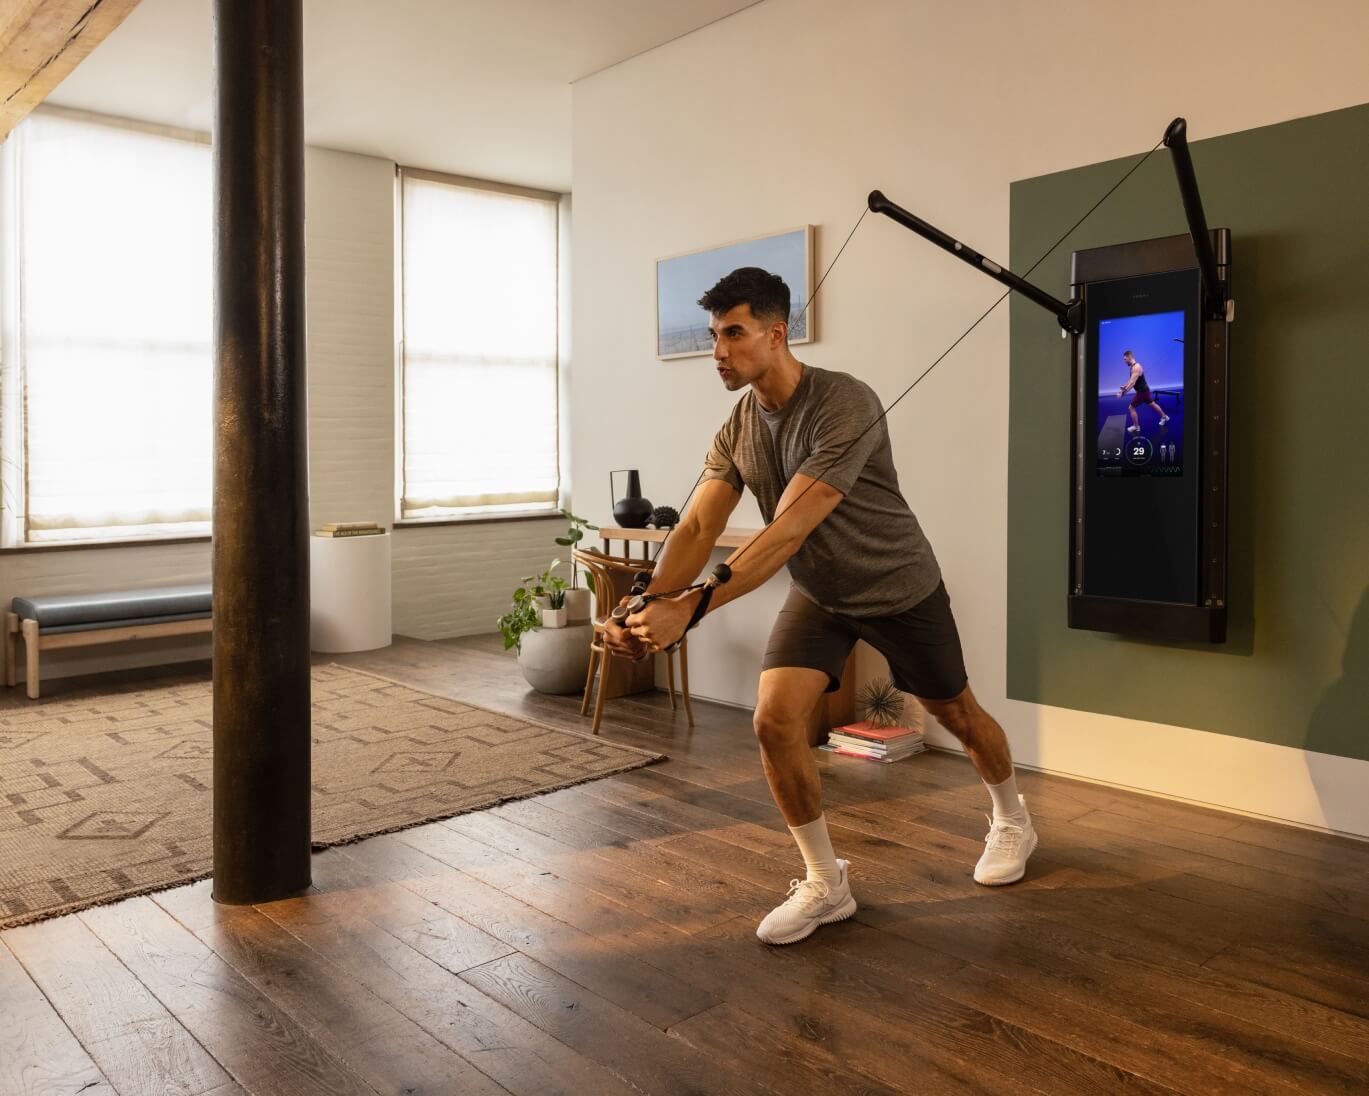 A man is working out in his living room. He is facing away from Tonal, completing a Decline Fly.